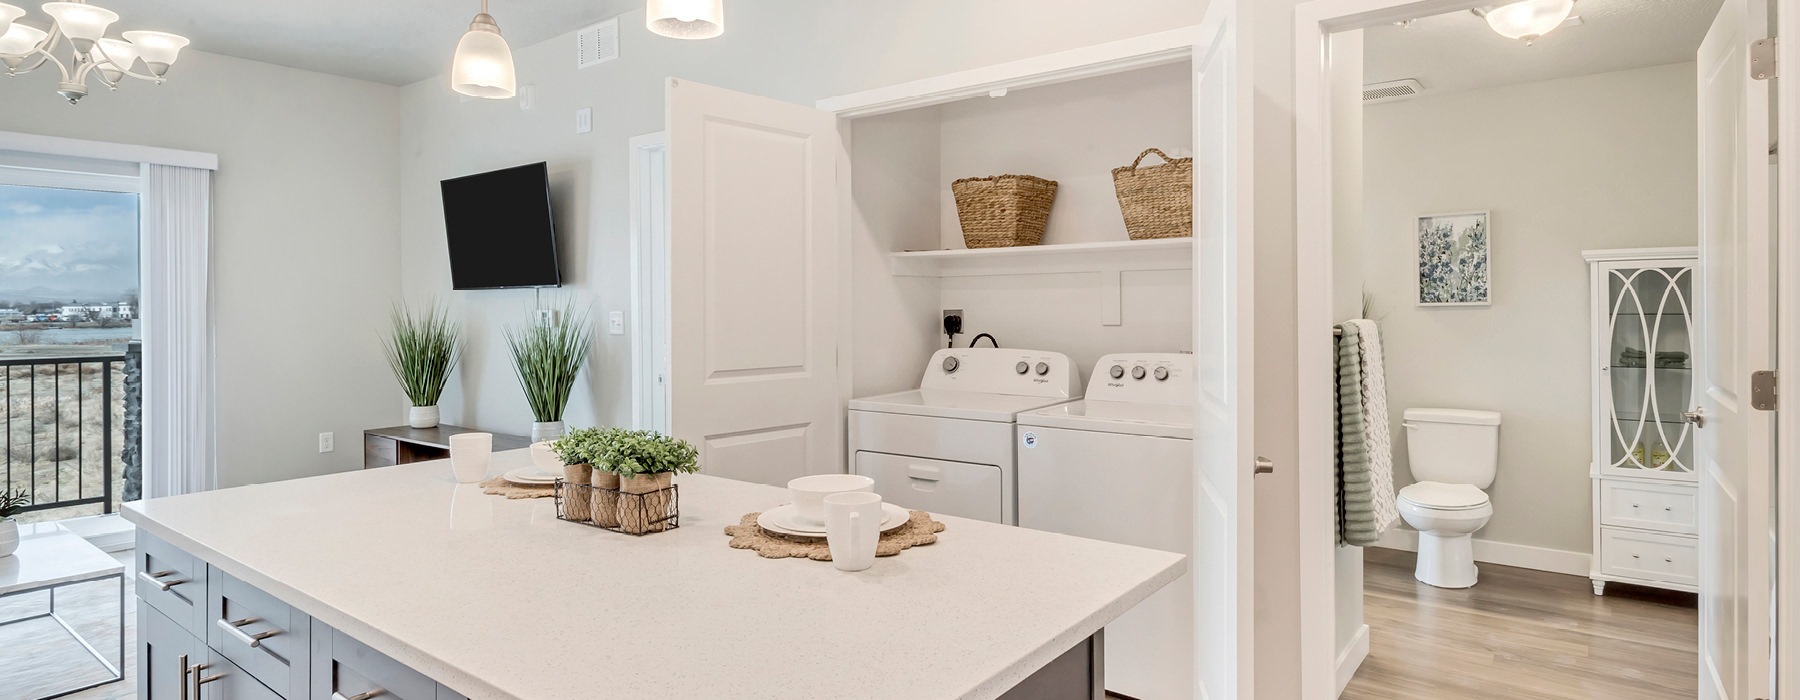 pendant lighting over kitchen island adjacent to laundry closet with side-by-side washer/dryer units